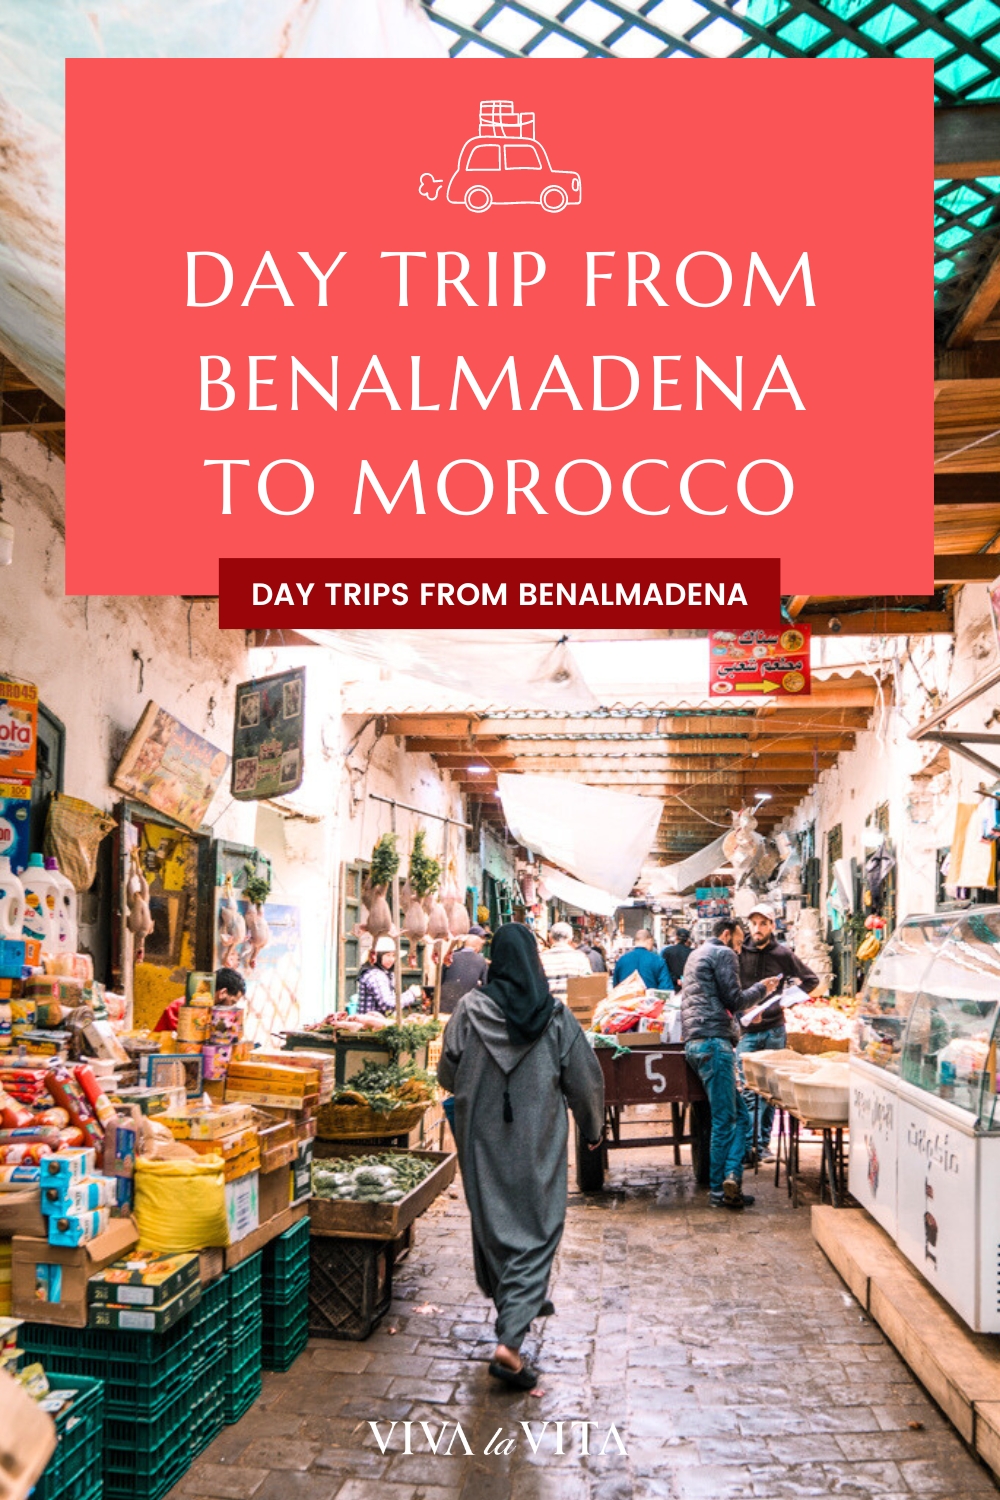 pinterest image showing a medina in Tetouan, Morocco with a headline - day trip from benalmadena to morocco, day trips from Benalmadena